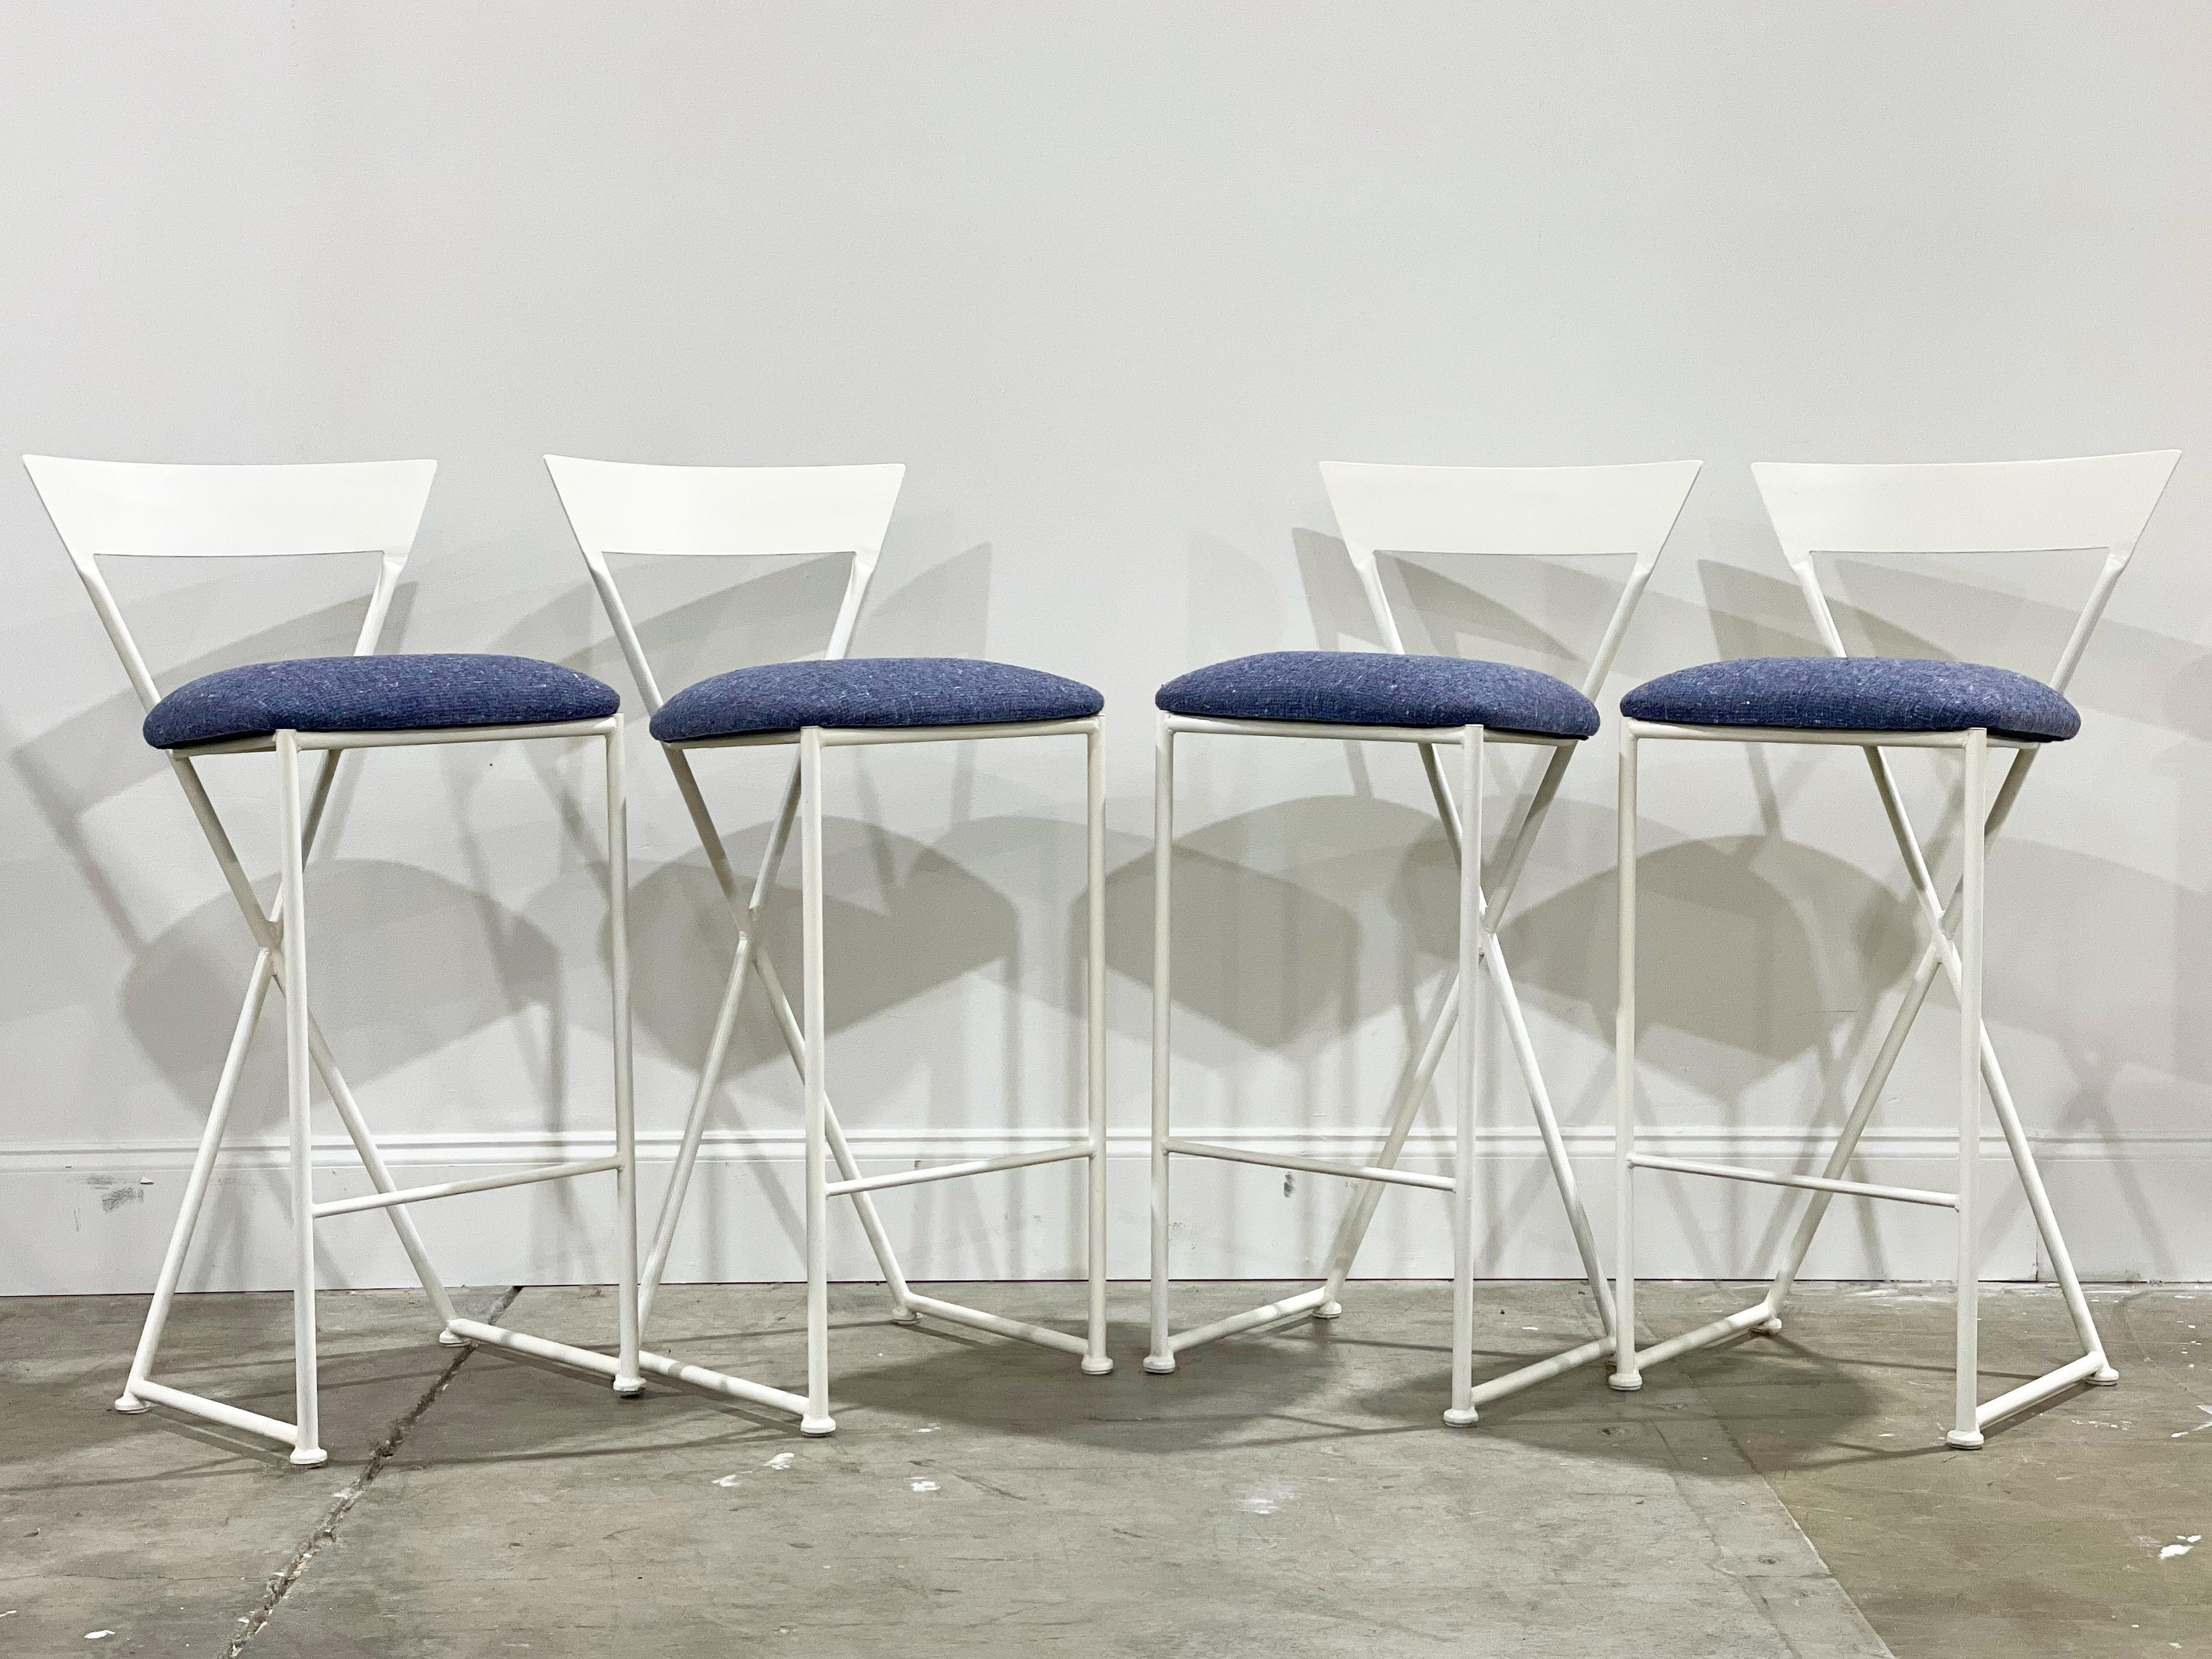 Rare post modern bar stools by Shaver Howard. Bar height. Stark clean angles offset by soft creamy off white lacquer and indigo tone Maharam tweed. This set of four is unique on the market. The stools are in excellent condition. Freshly lacquered in